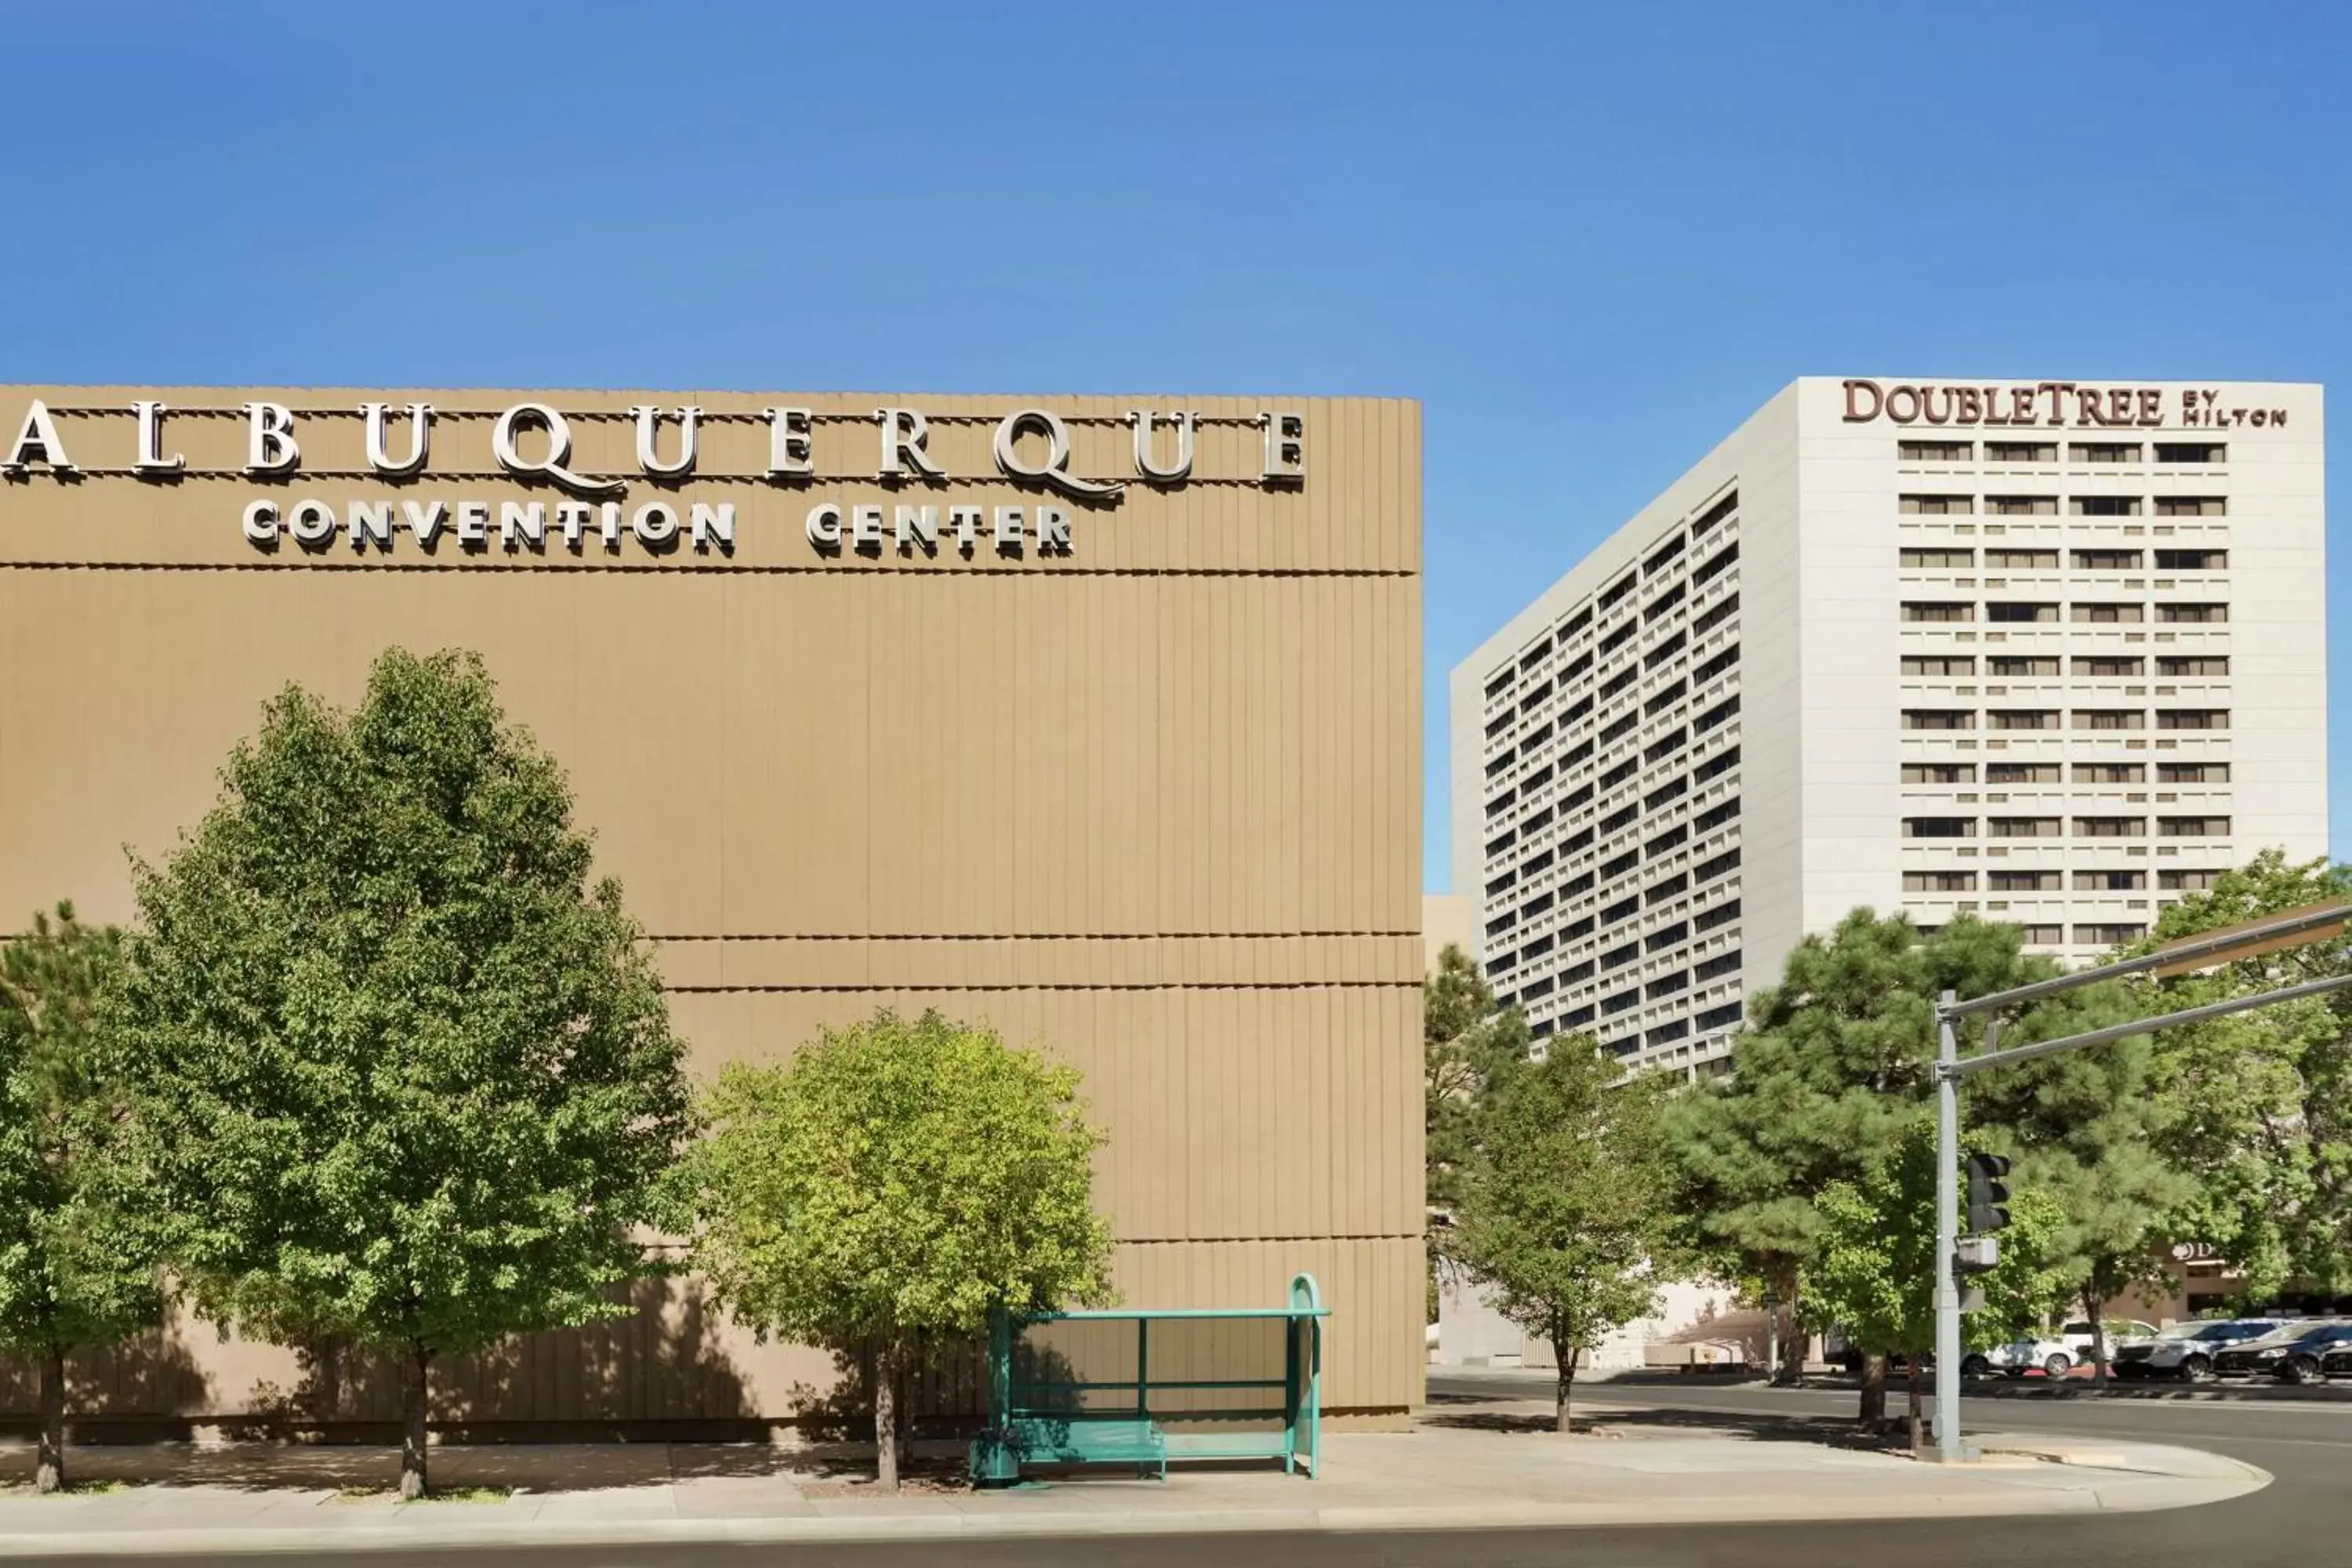 Property Building in DoubleTree by Hilton Hotel Albuquerque